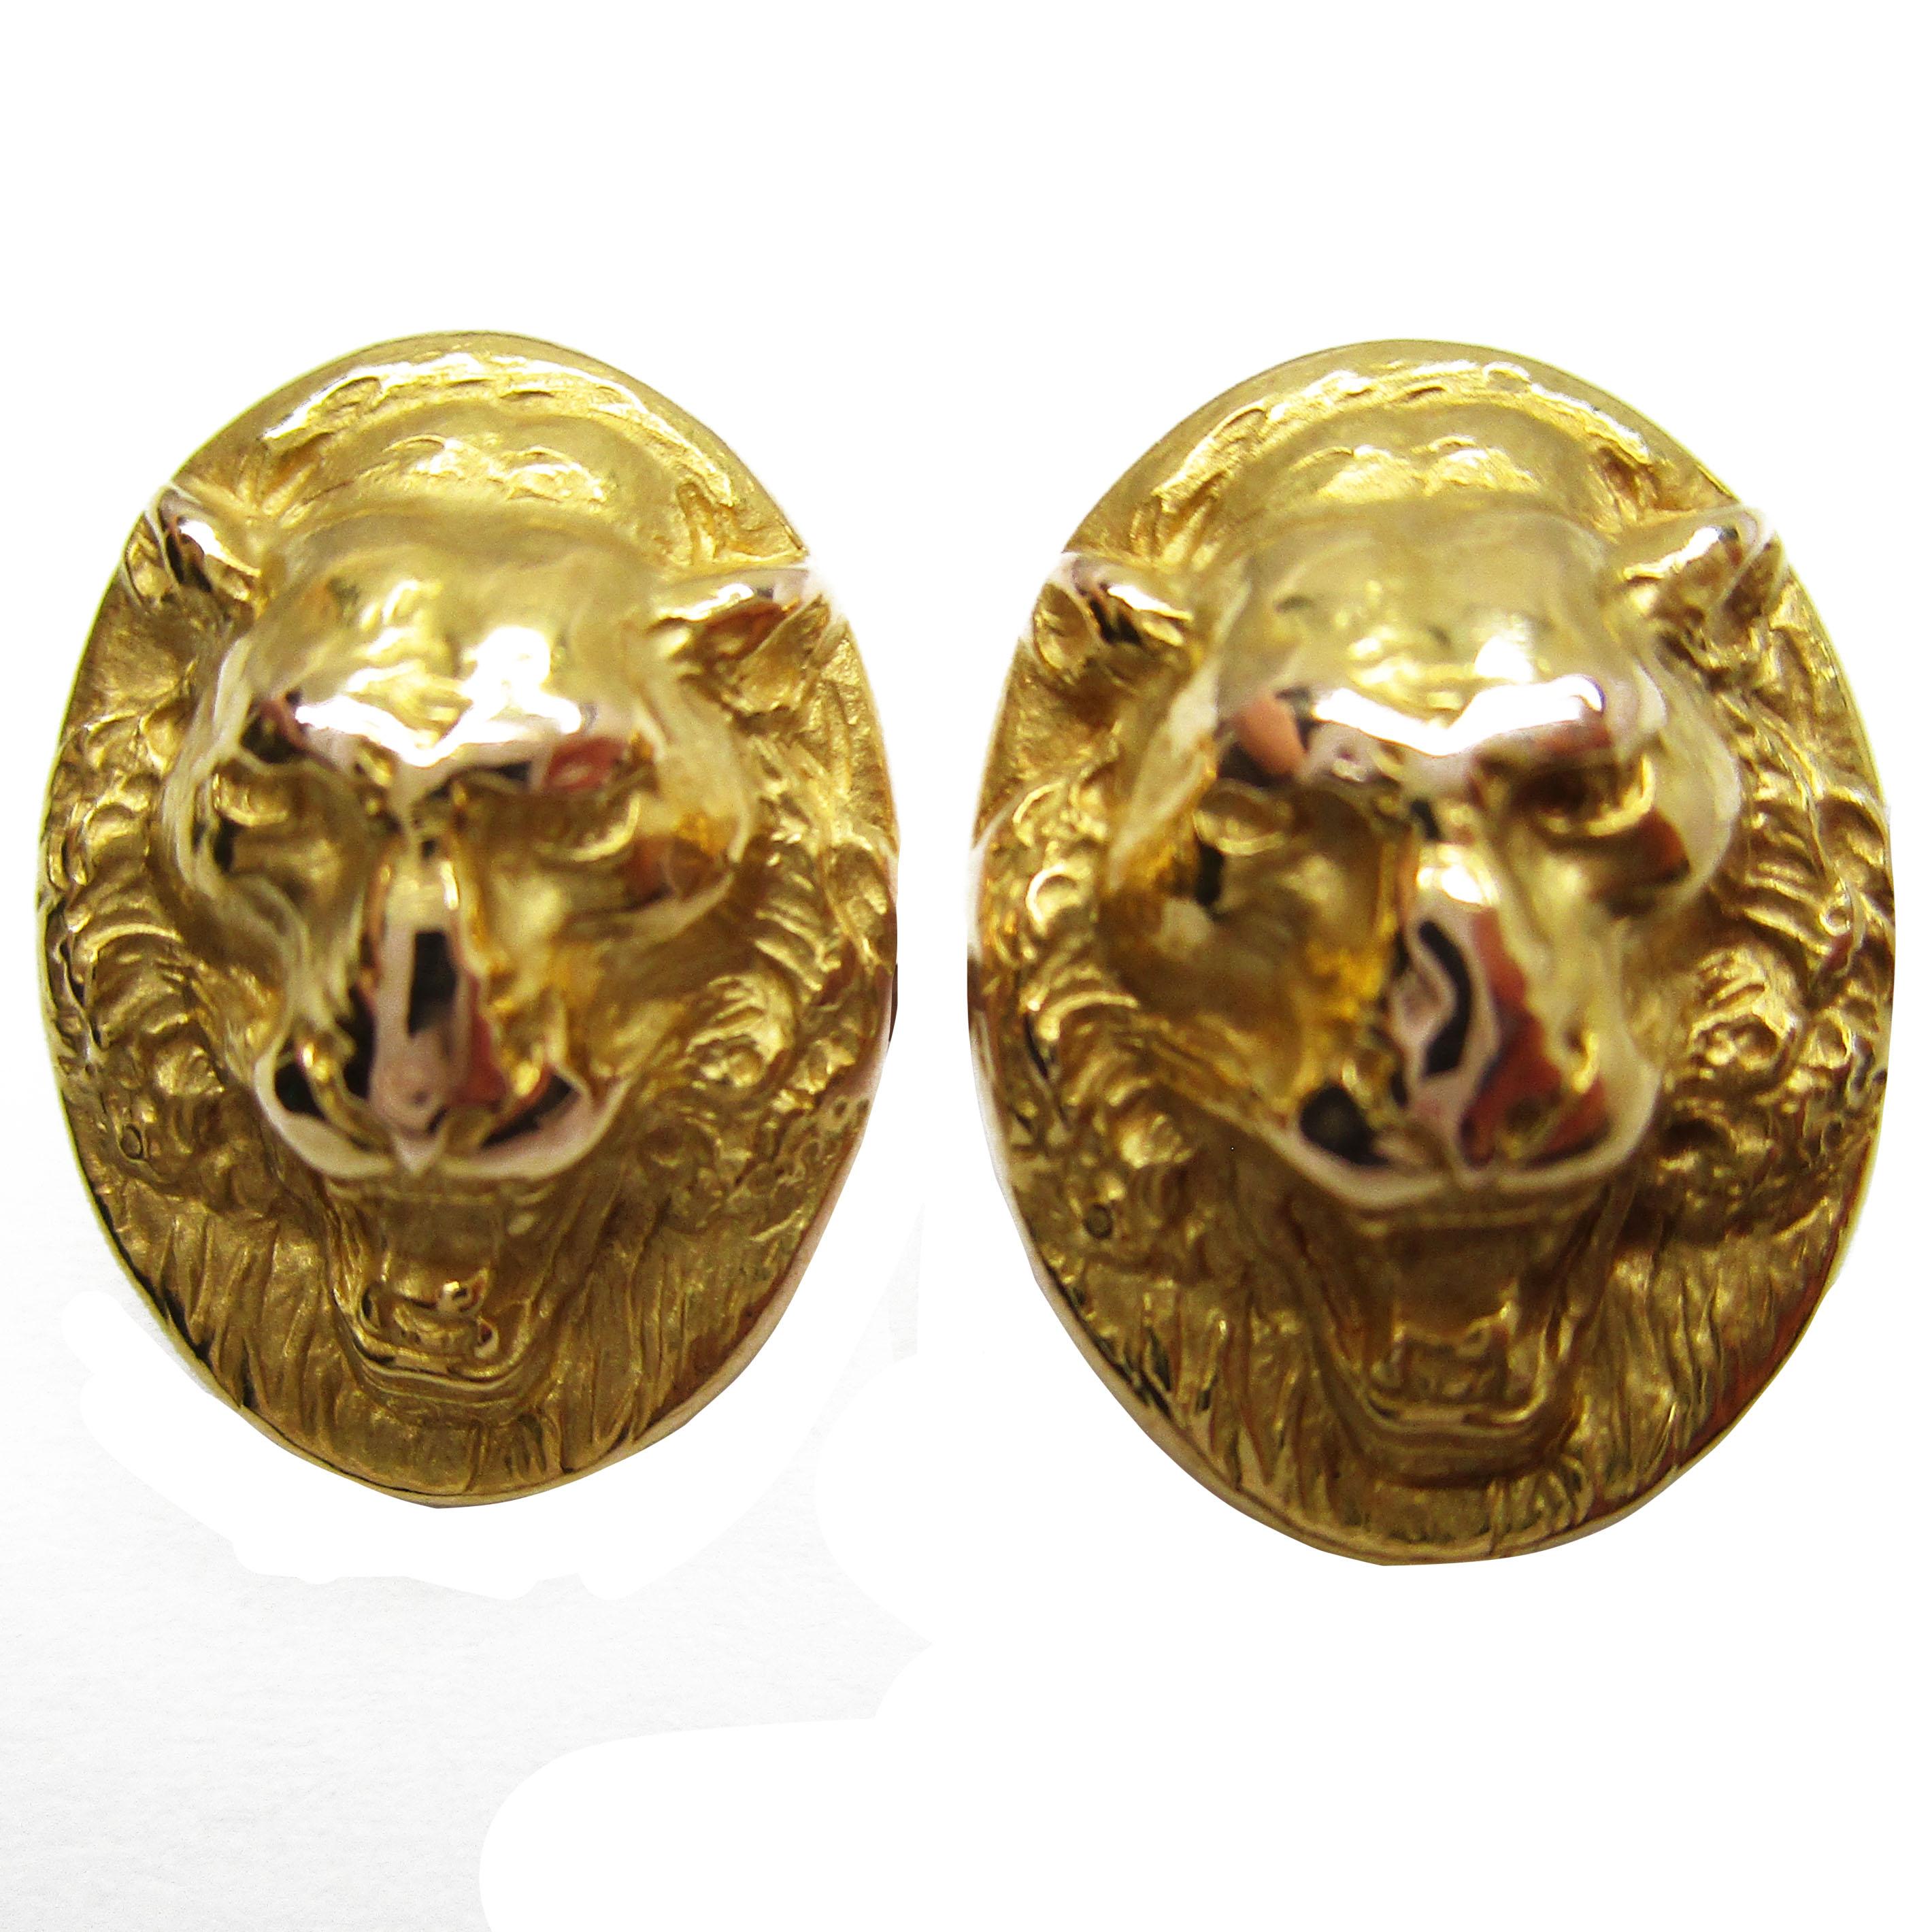 These are original 14-karat yellow gold cufflinks. They have a simply incredible lifelike roaring lion design, matched perfectly with a ferocious lioness. They will provide any gentleman with the stylish elegance that proclaims boldly that he is the